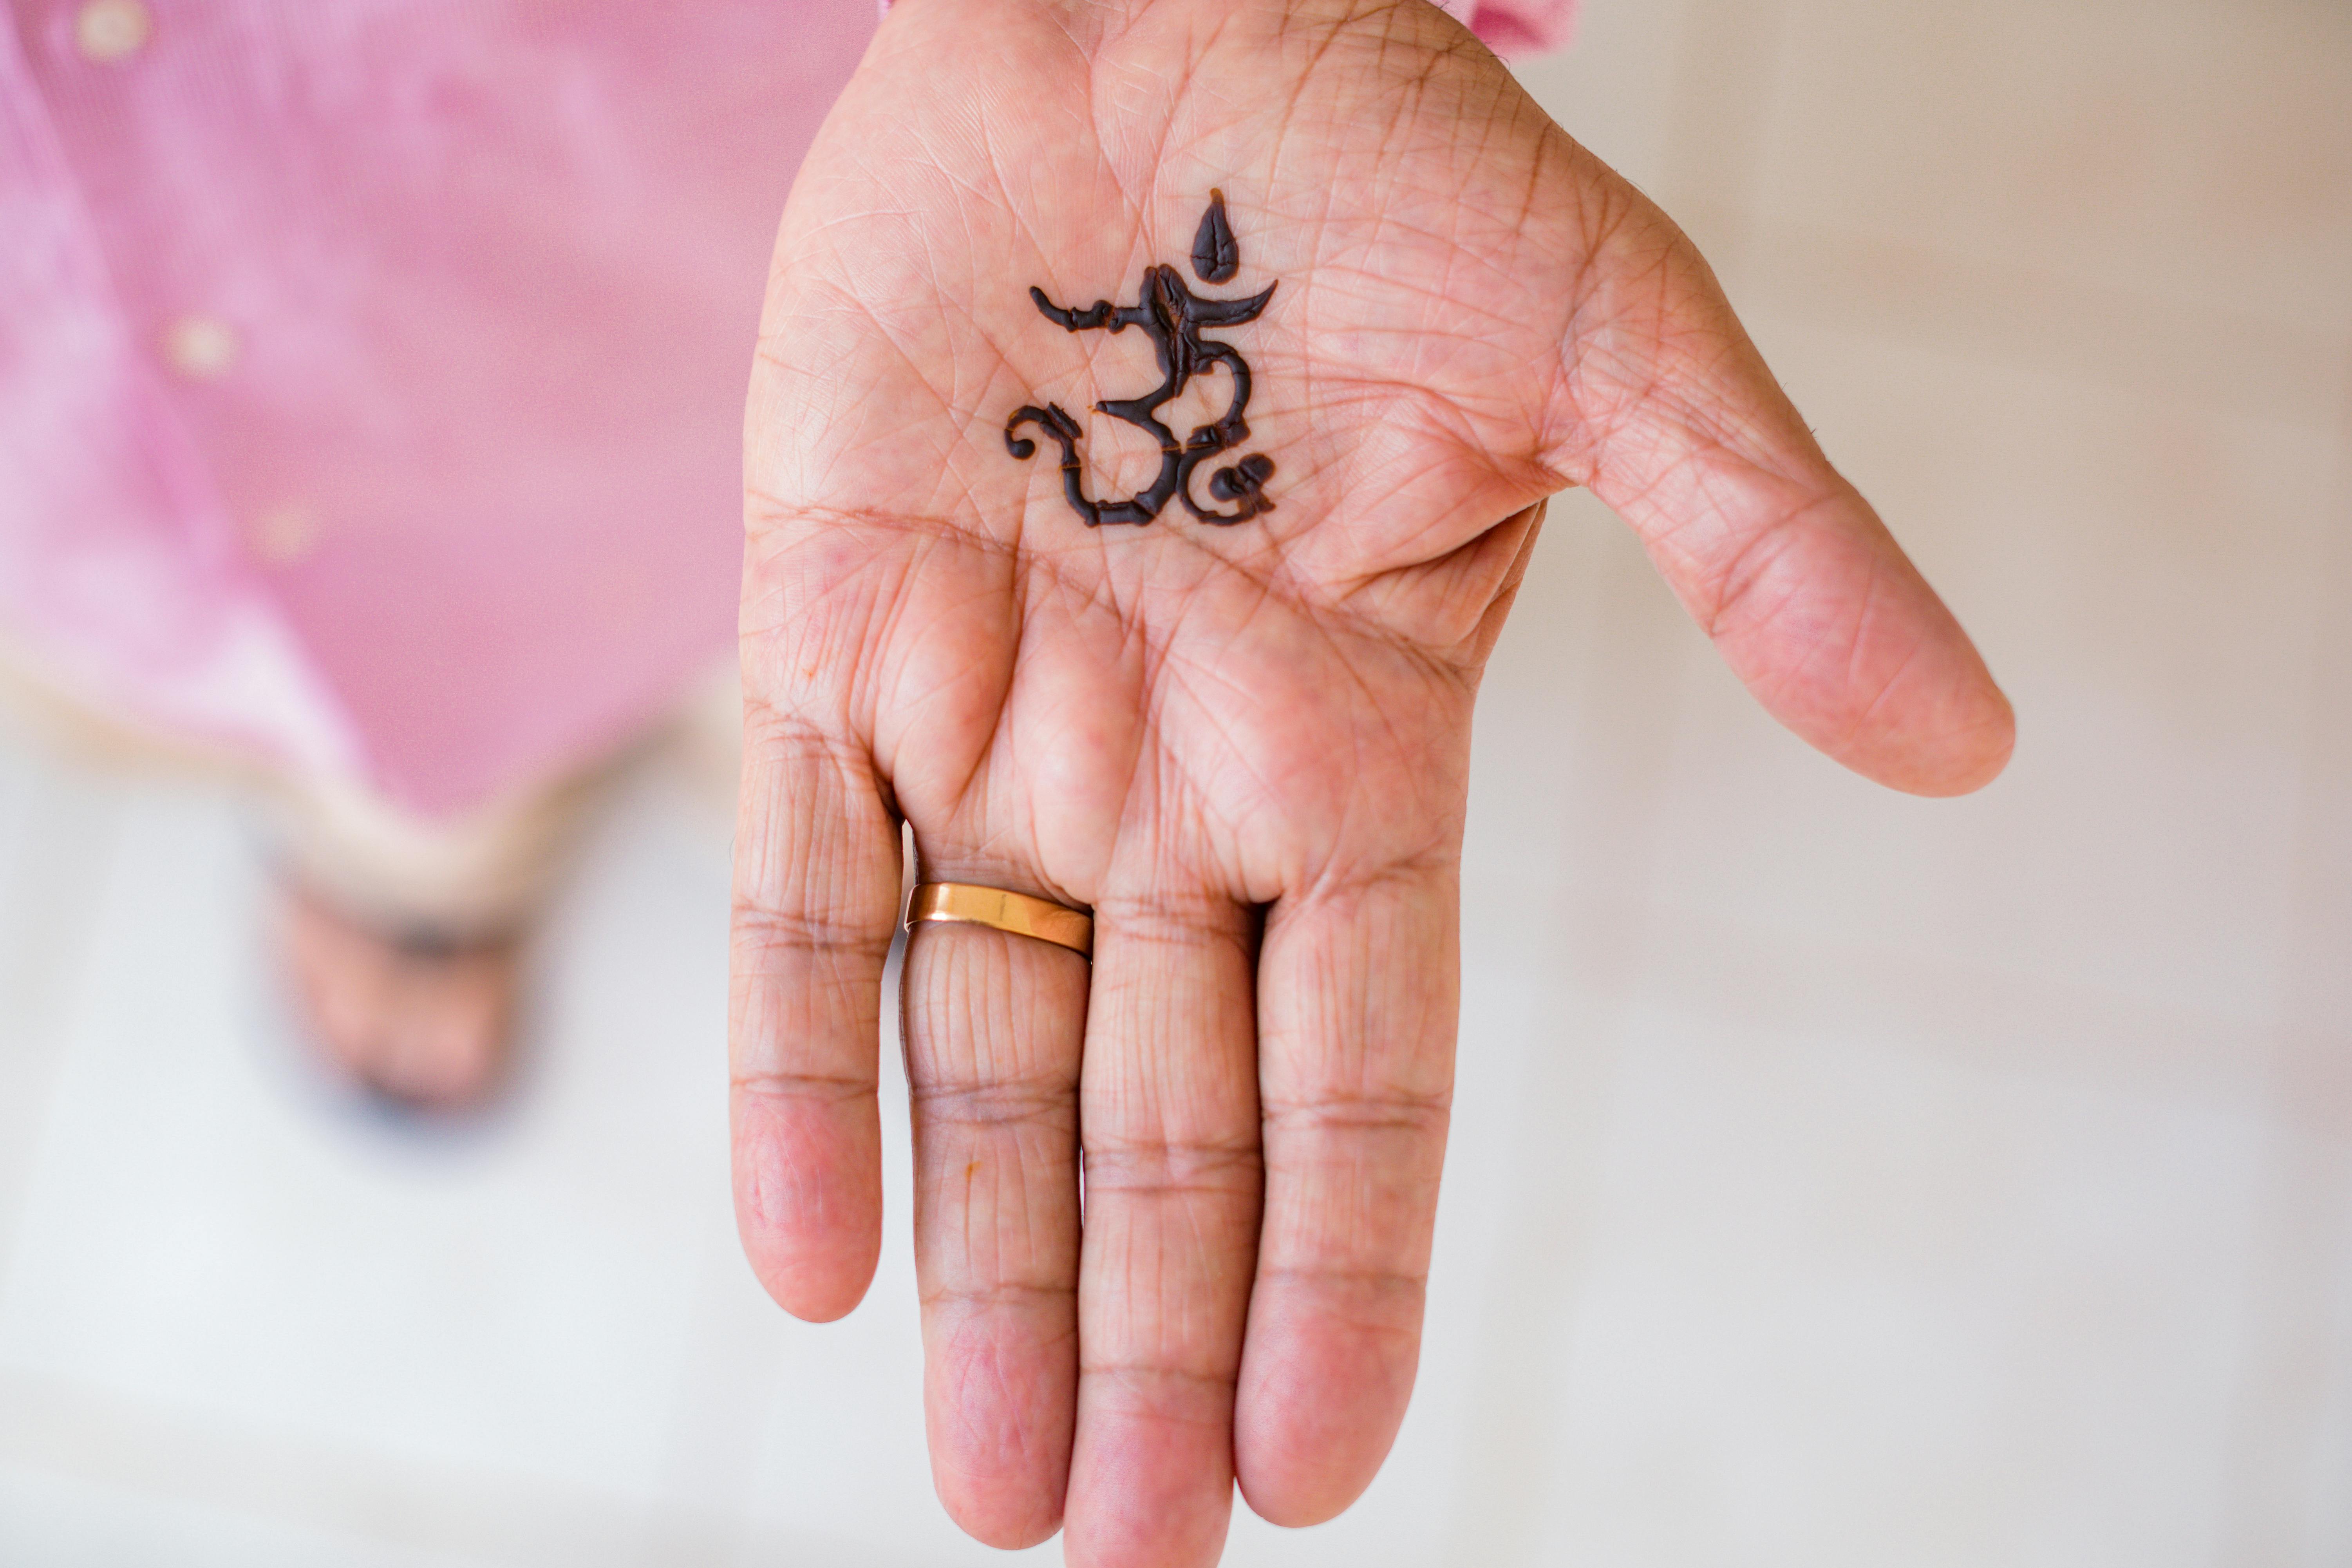 A Person with Henna Tattoo on the Hand Wearing Gold Ring · Free Stock Photo